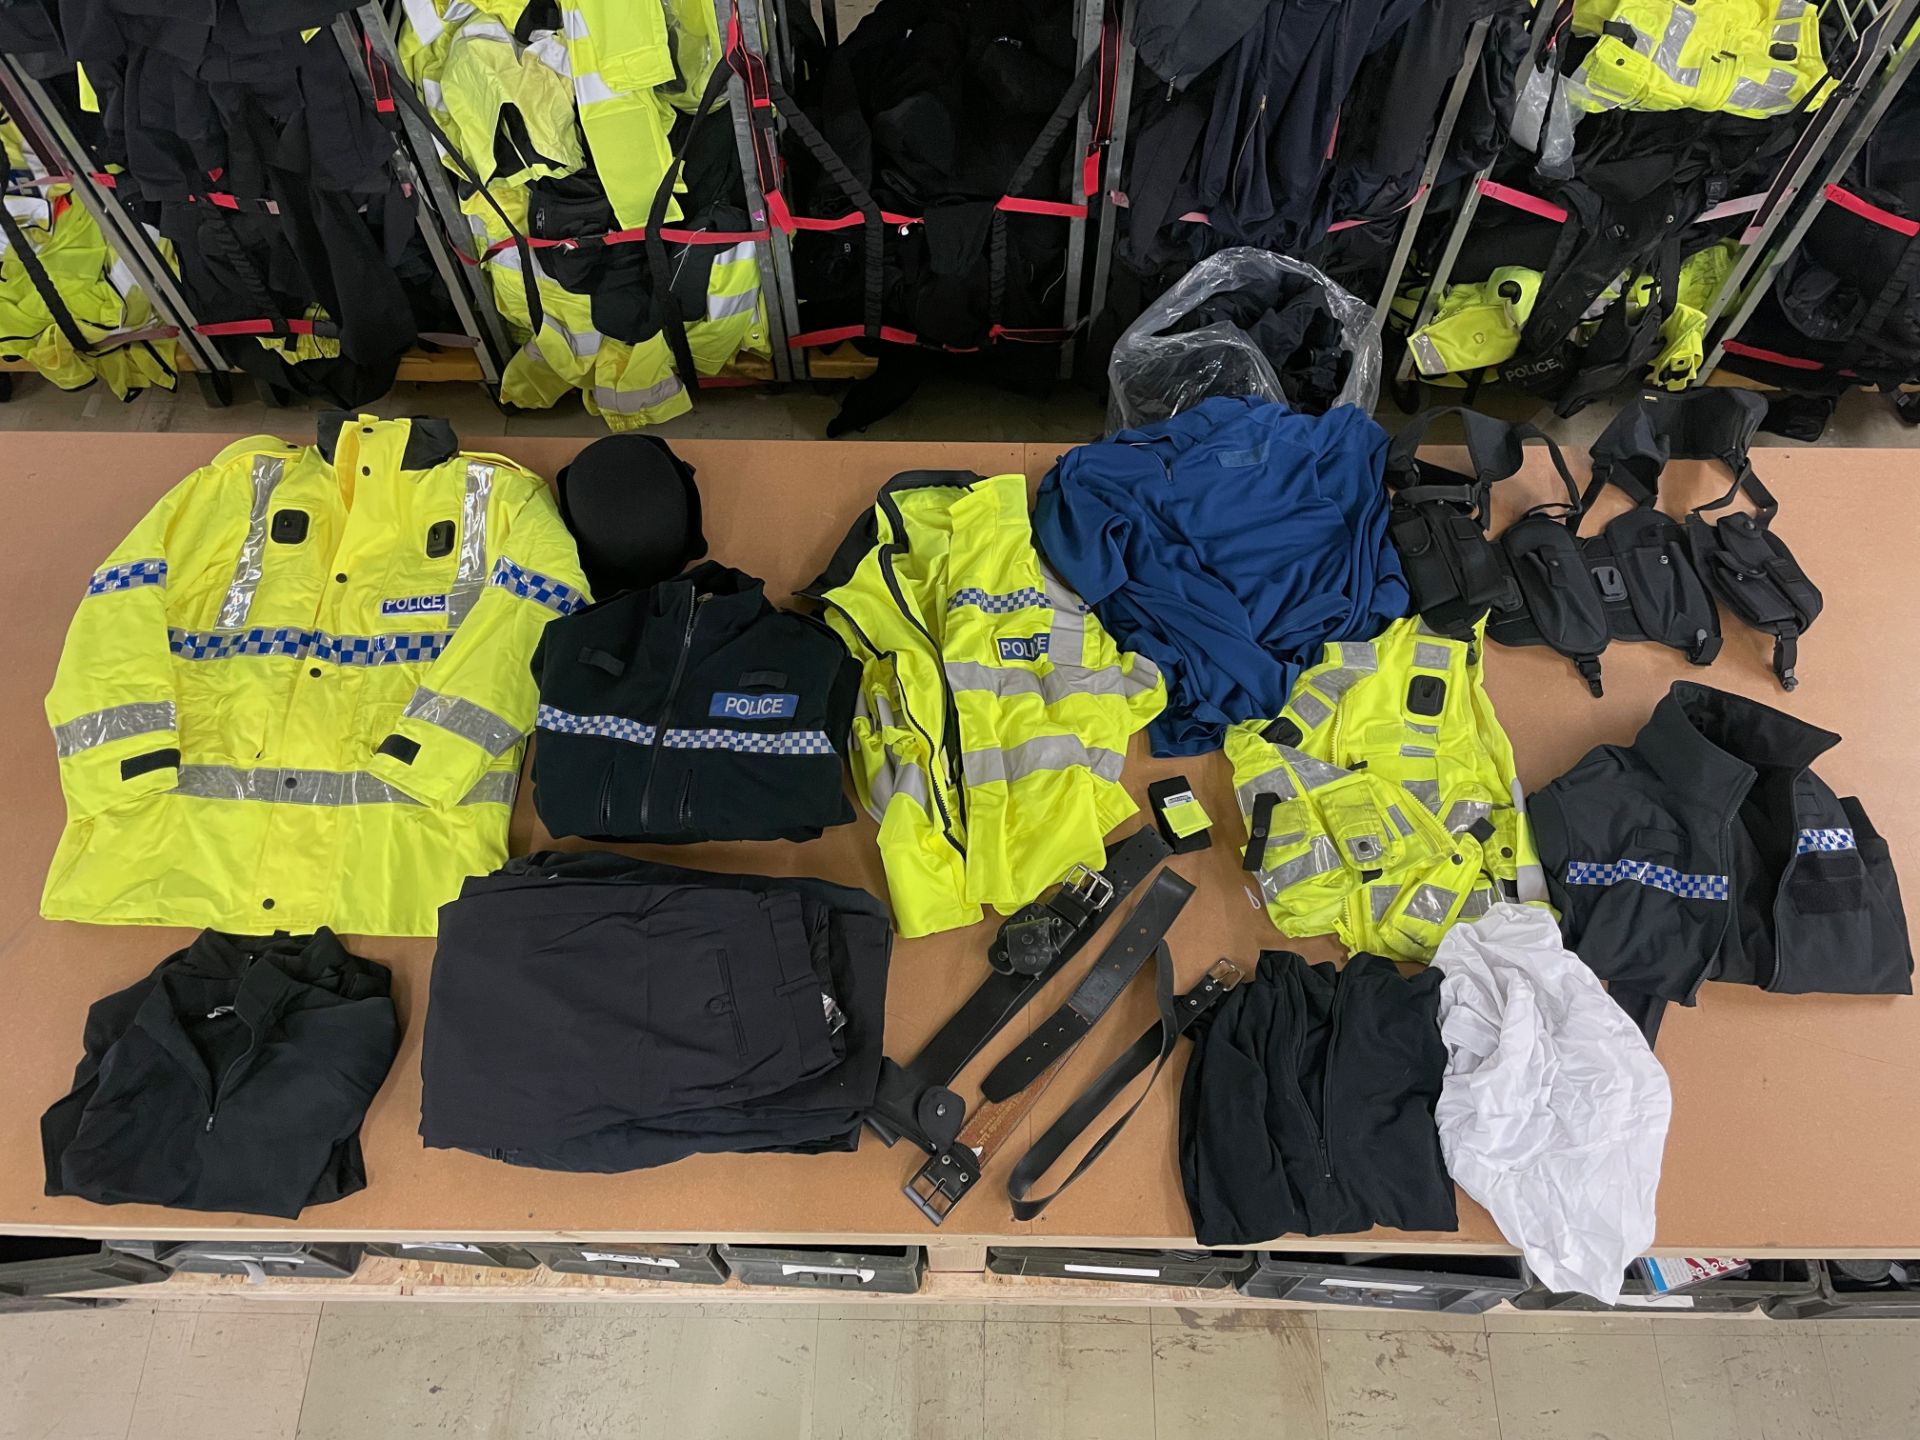 5 X BAGS STUFFED WITH EX POLICE UNIFORM CLOTHING & ACCESSORIES - RRP £1375.00 - NO VAT ON HAMMER - Bild 9 aus 12